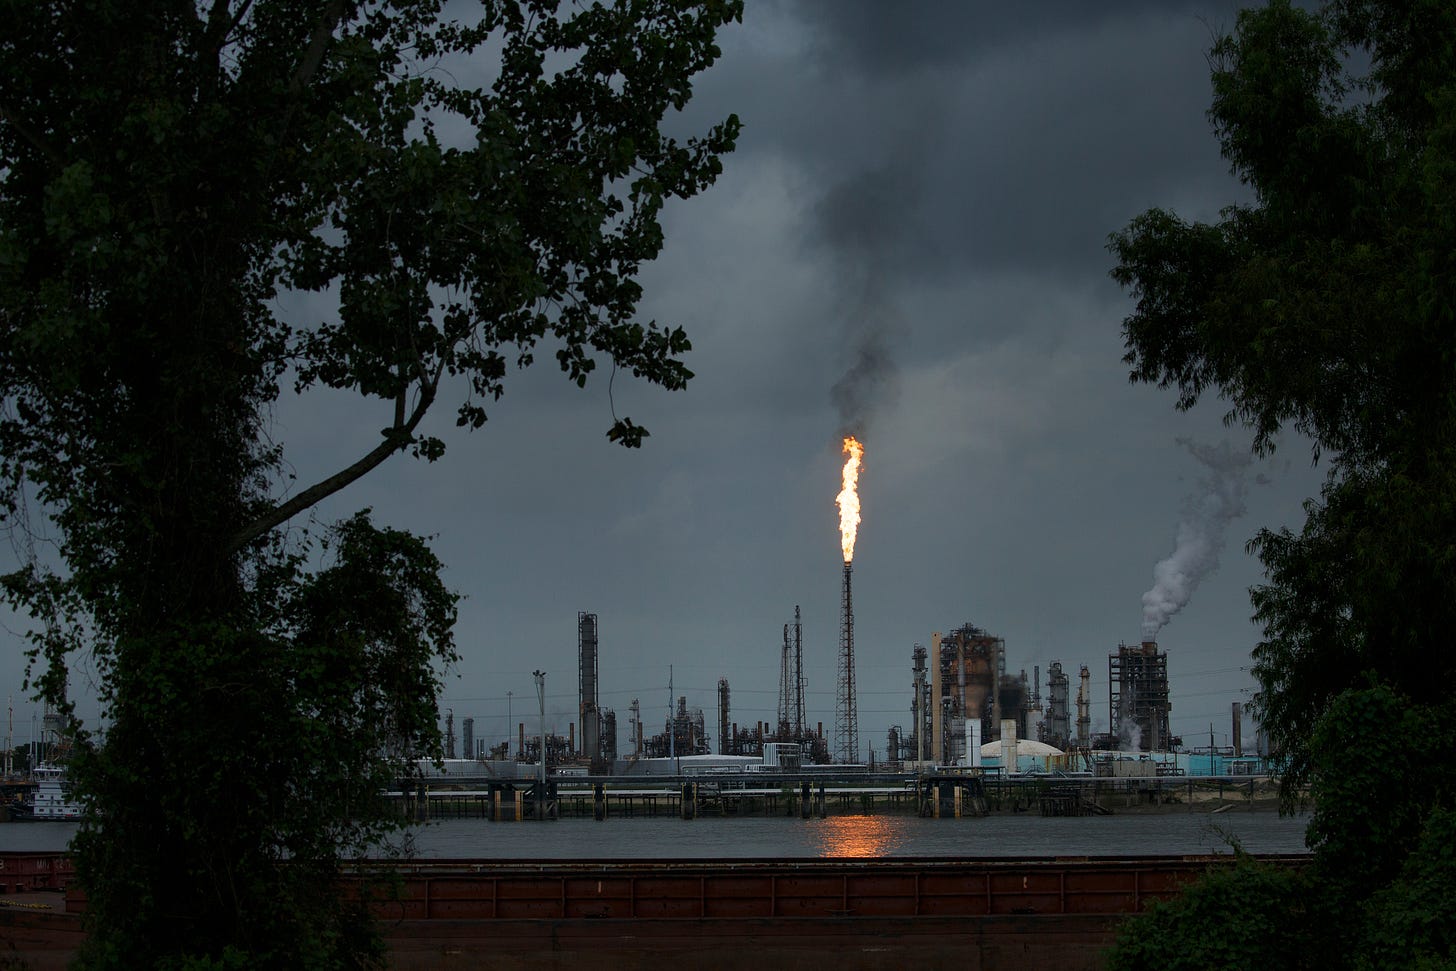 A gas flare from Shell’s petroleum refinery illuminates the sky in Norco, La. Credit: Drew Angerer/Getty Images